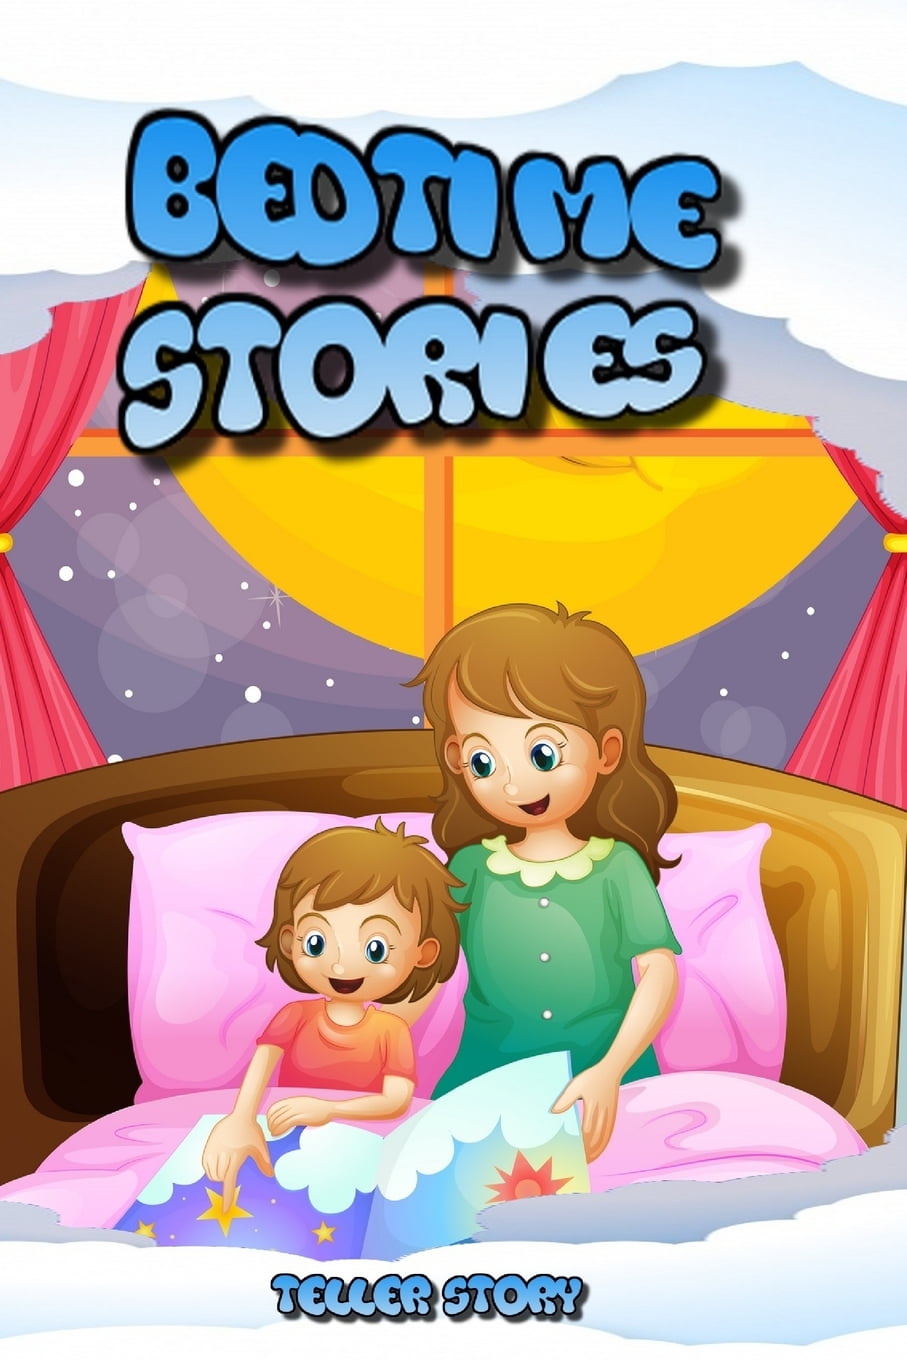 story books for babies